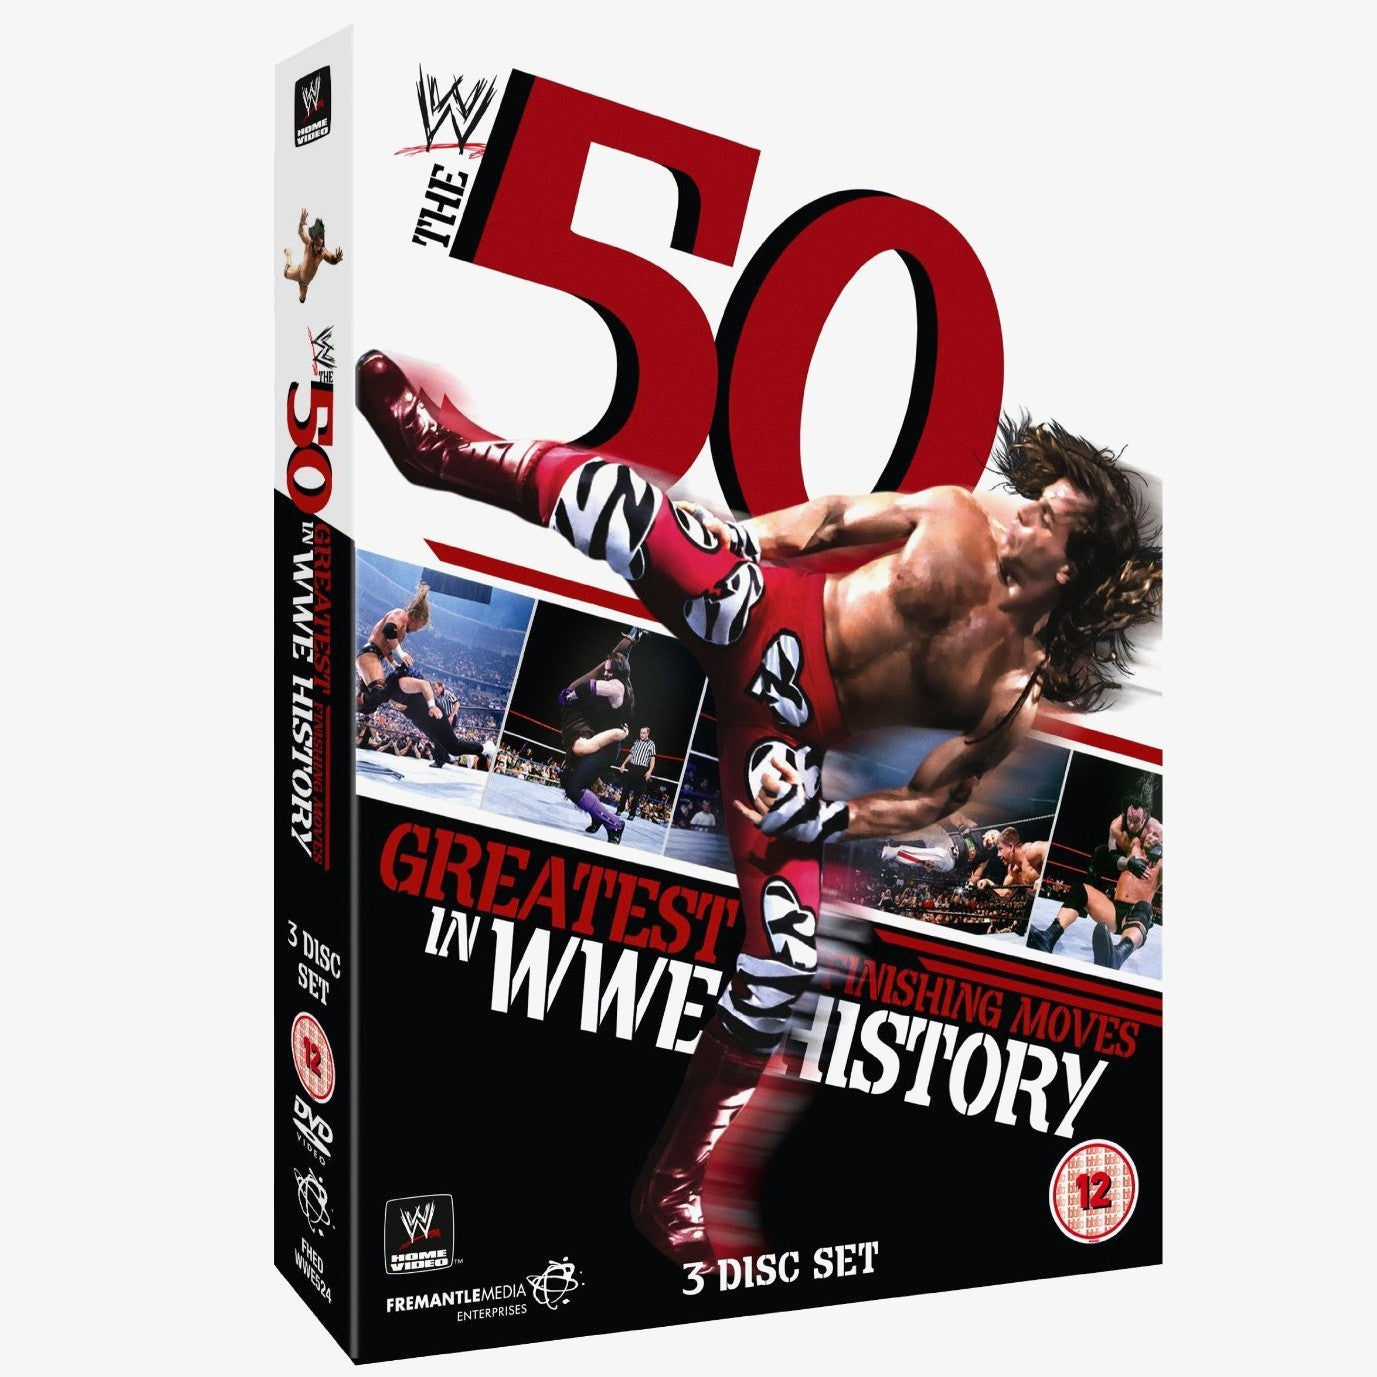 The 50 Greatest Finishing Moves in WWE History DVD – wrestlingshop.com